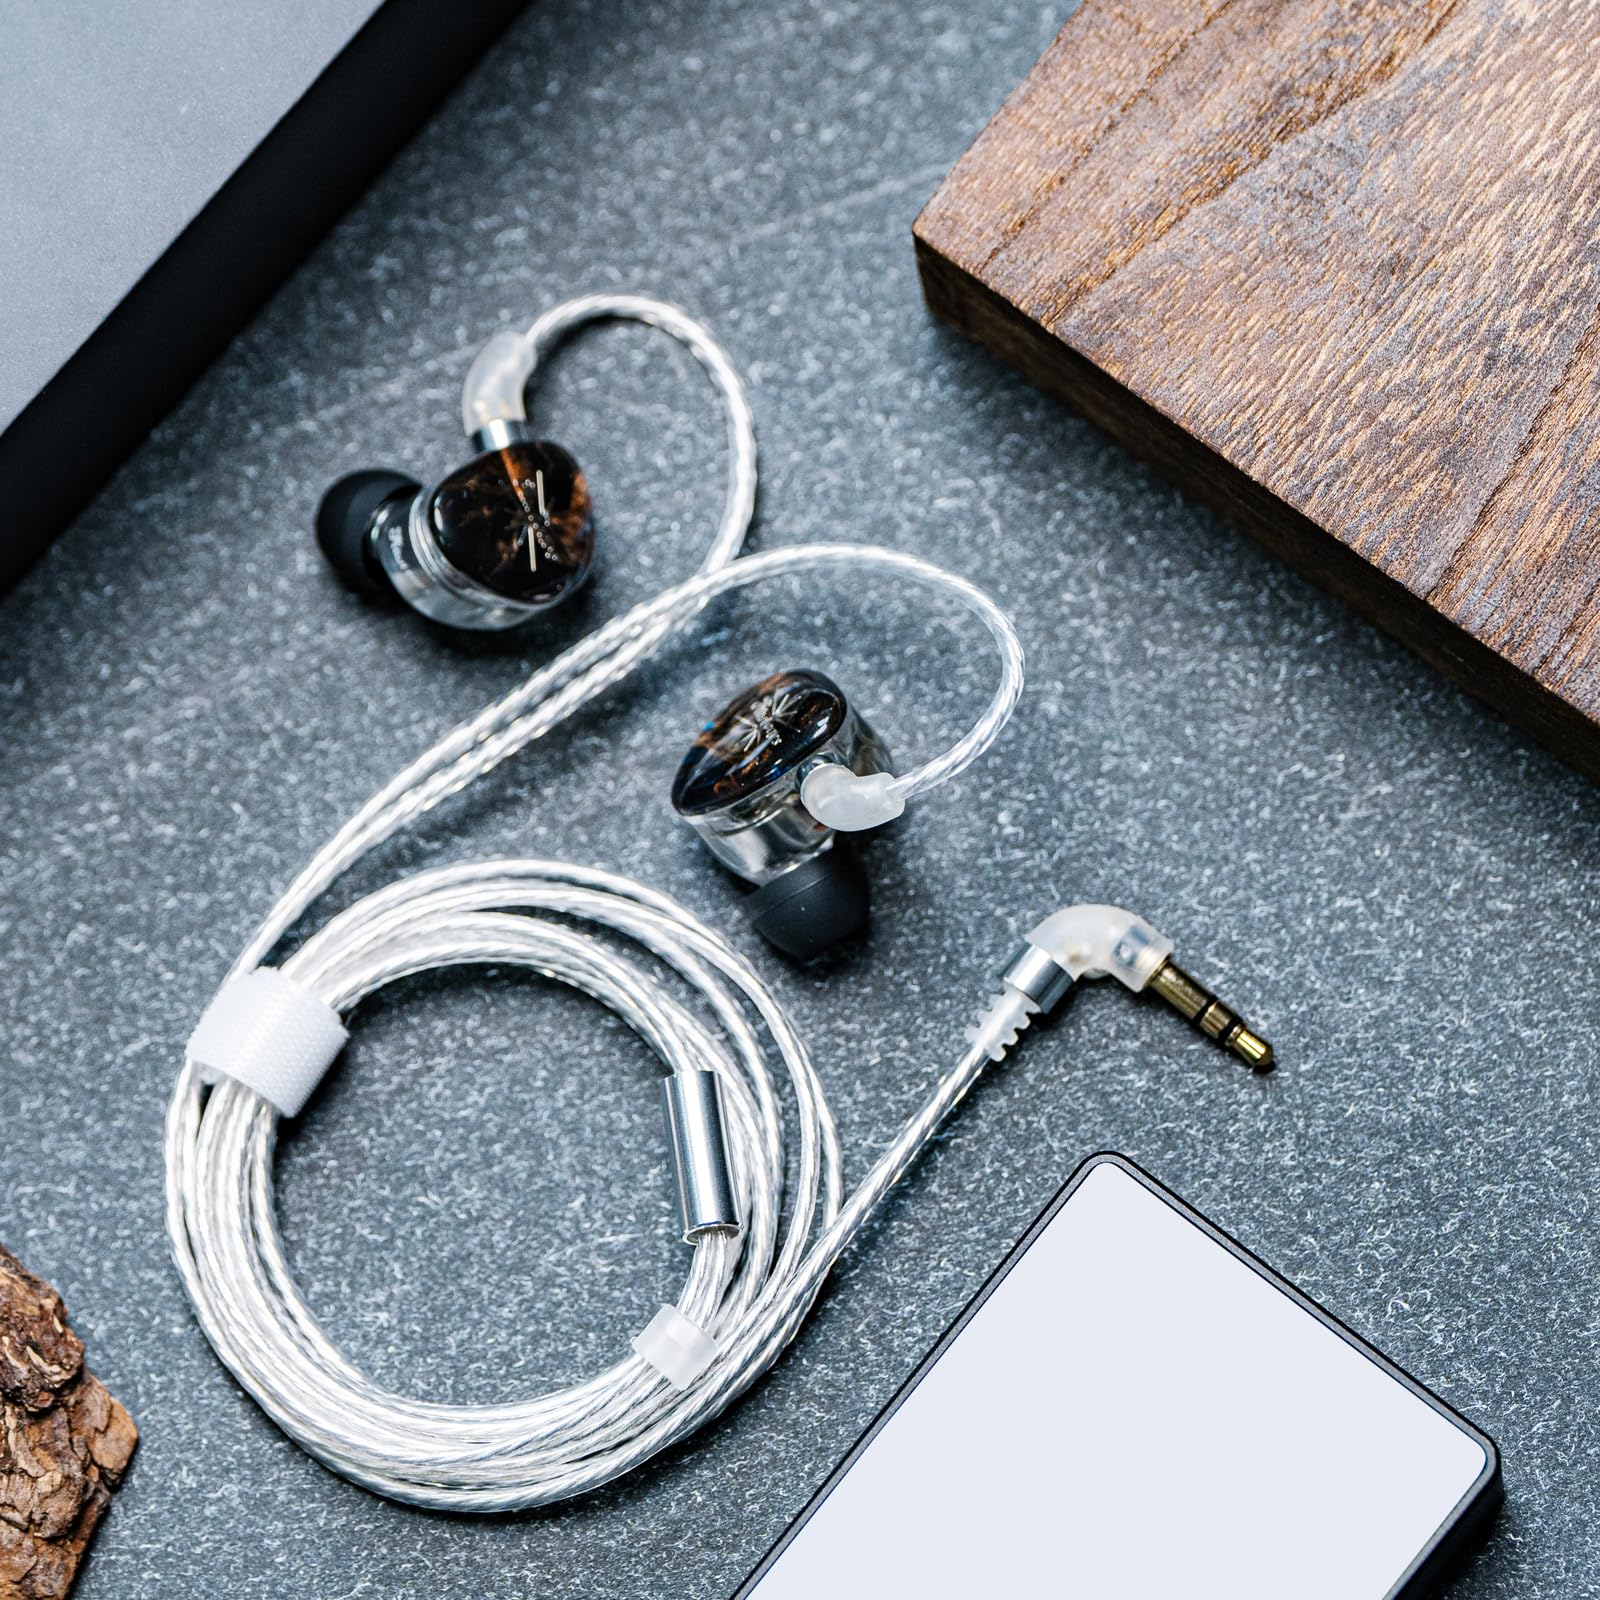 Linsoul Kiwi Ears x Crinacle: Singolo in Ear Monitor, 11mm Dynamic Driver Wired Earbuds $58.17